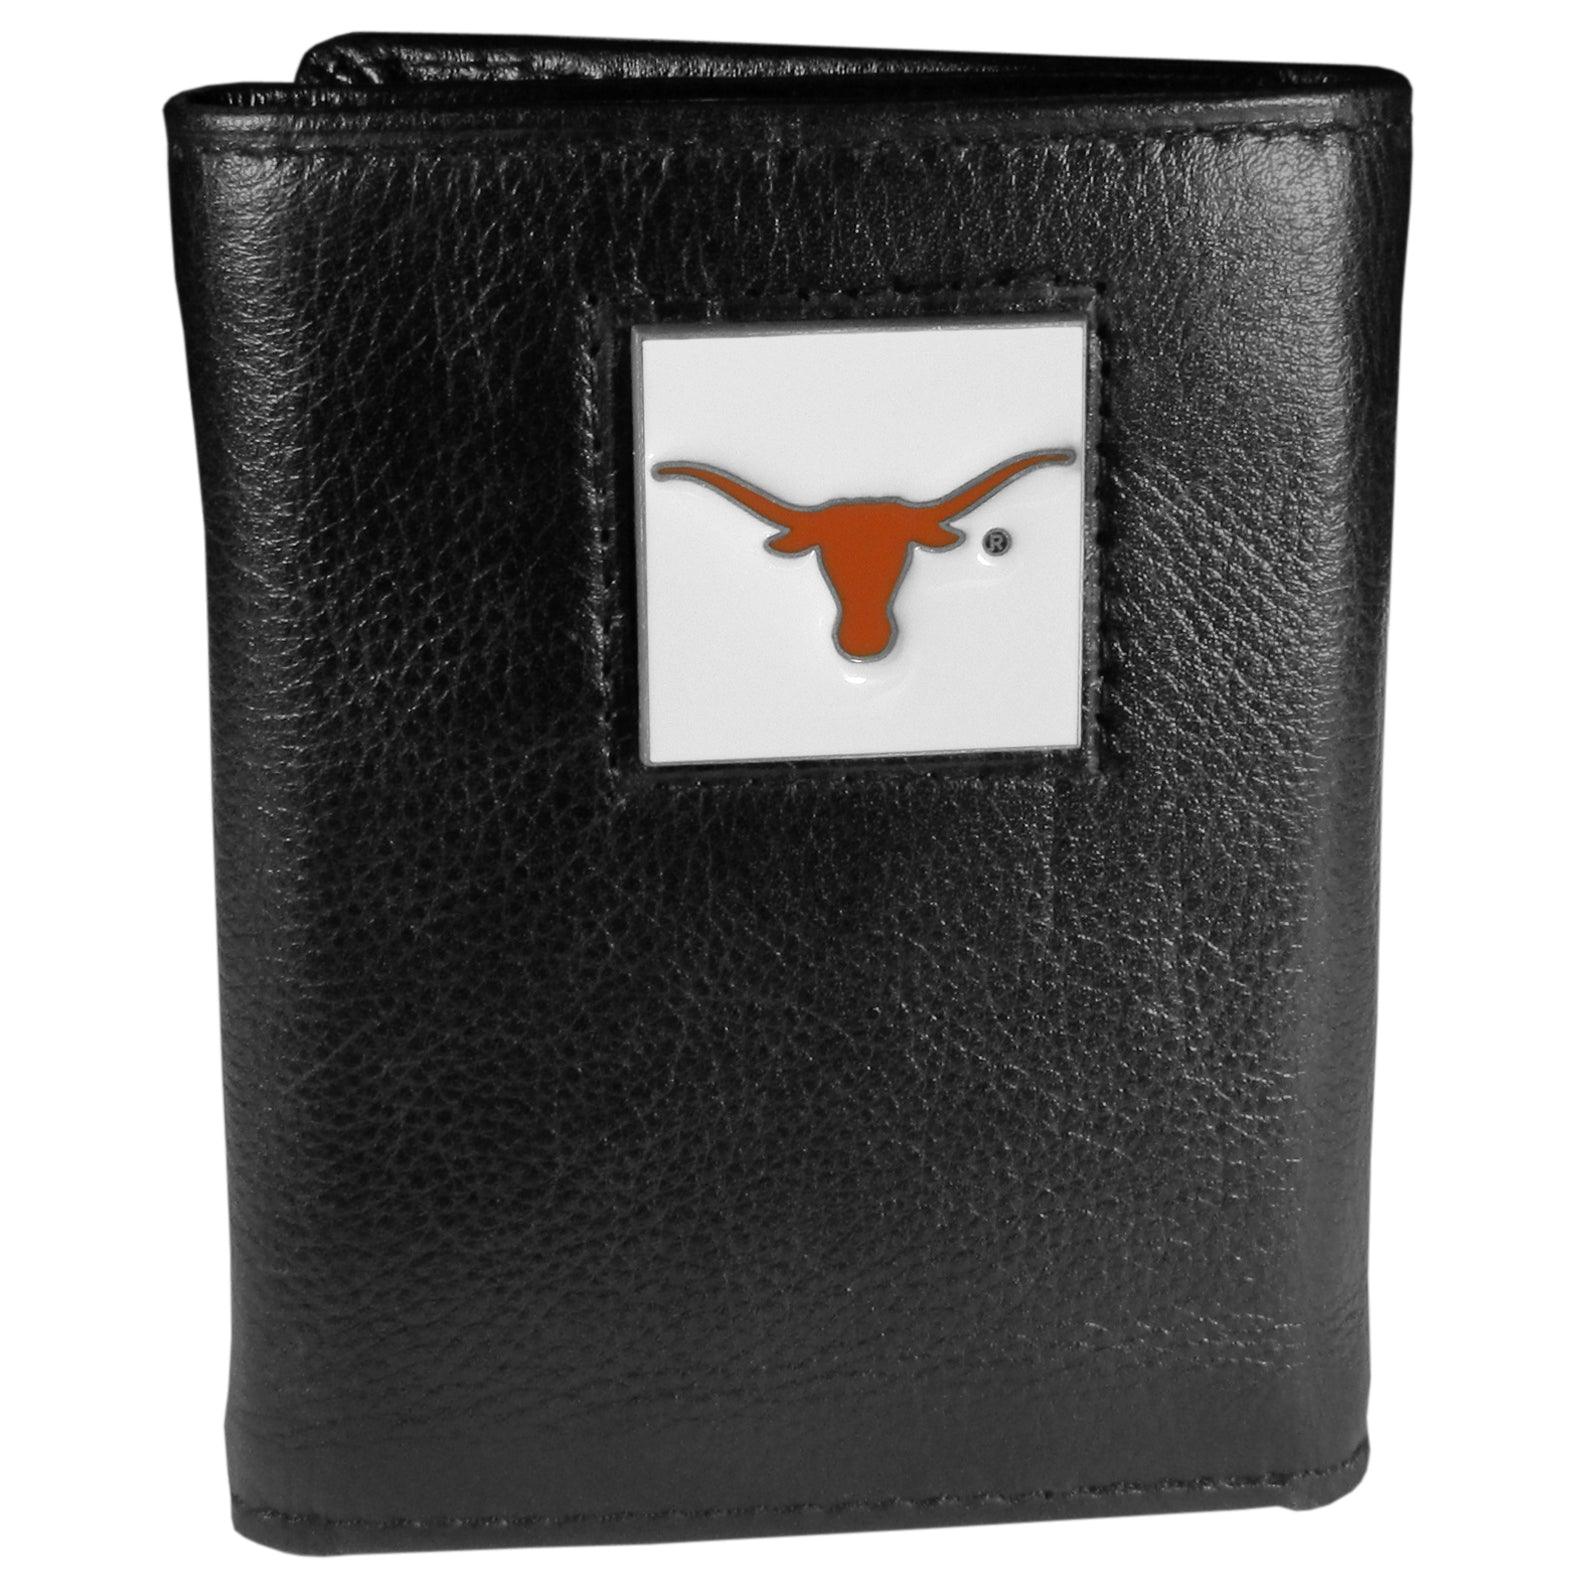 Texas Longhorns Deluxe Leather Tri-fold Wallet Packaged in Gift Box - Flyclothing LLC